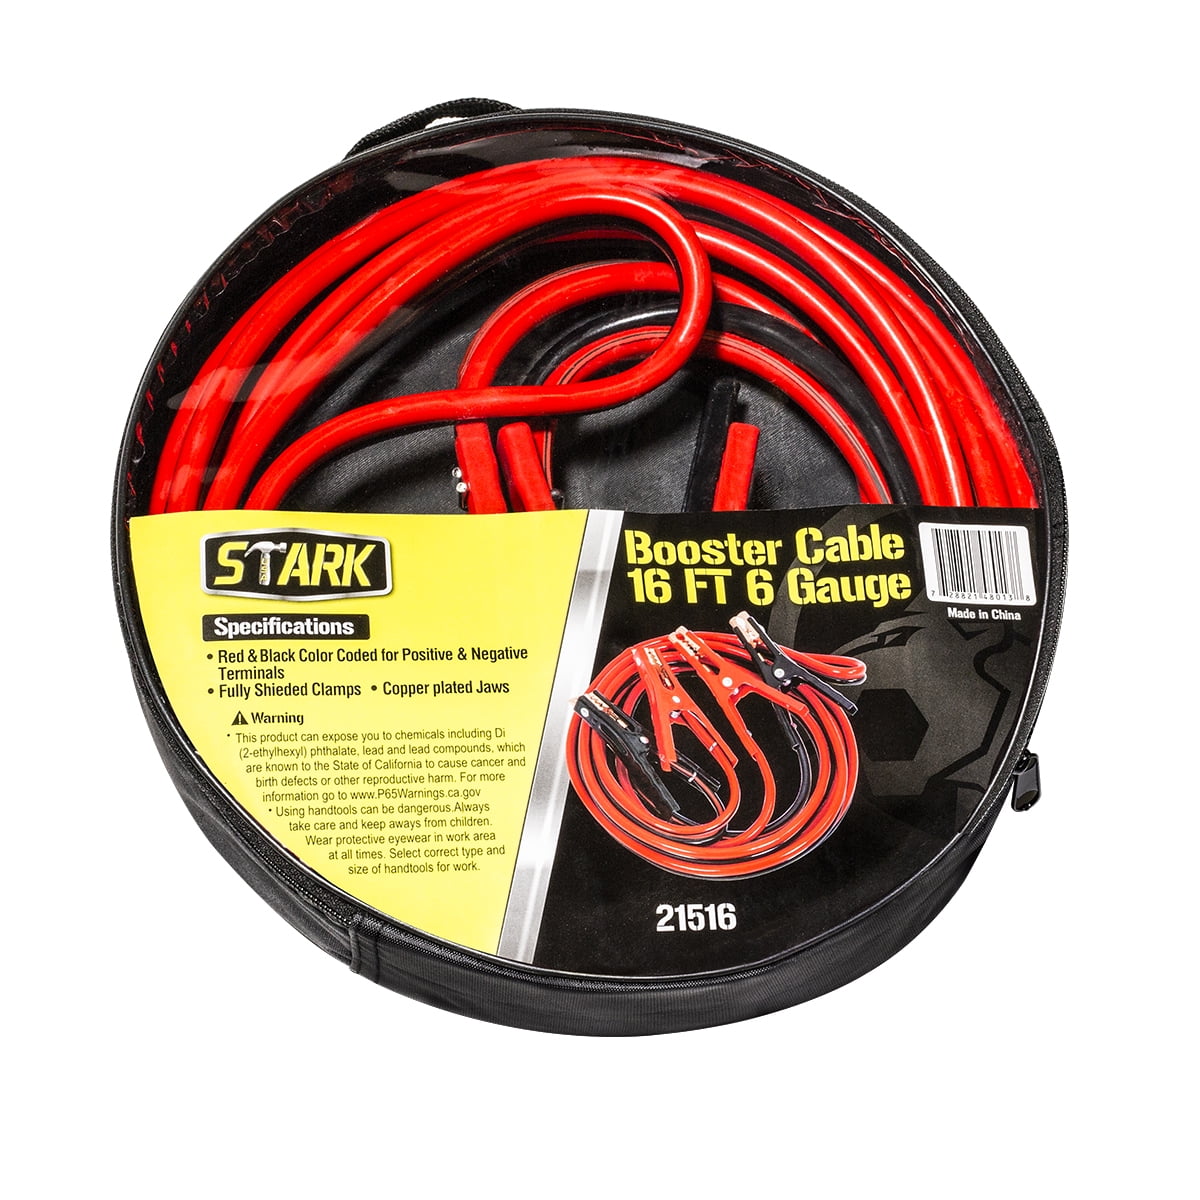 16 FT 6Gauge Booster Cables Jumping Cable Emergency Jump start Heavy Duty new GS 